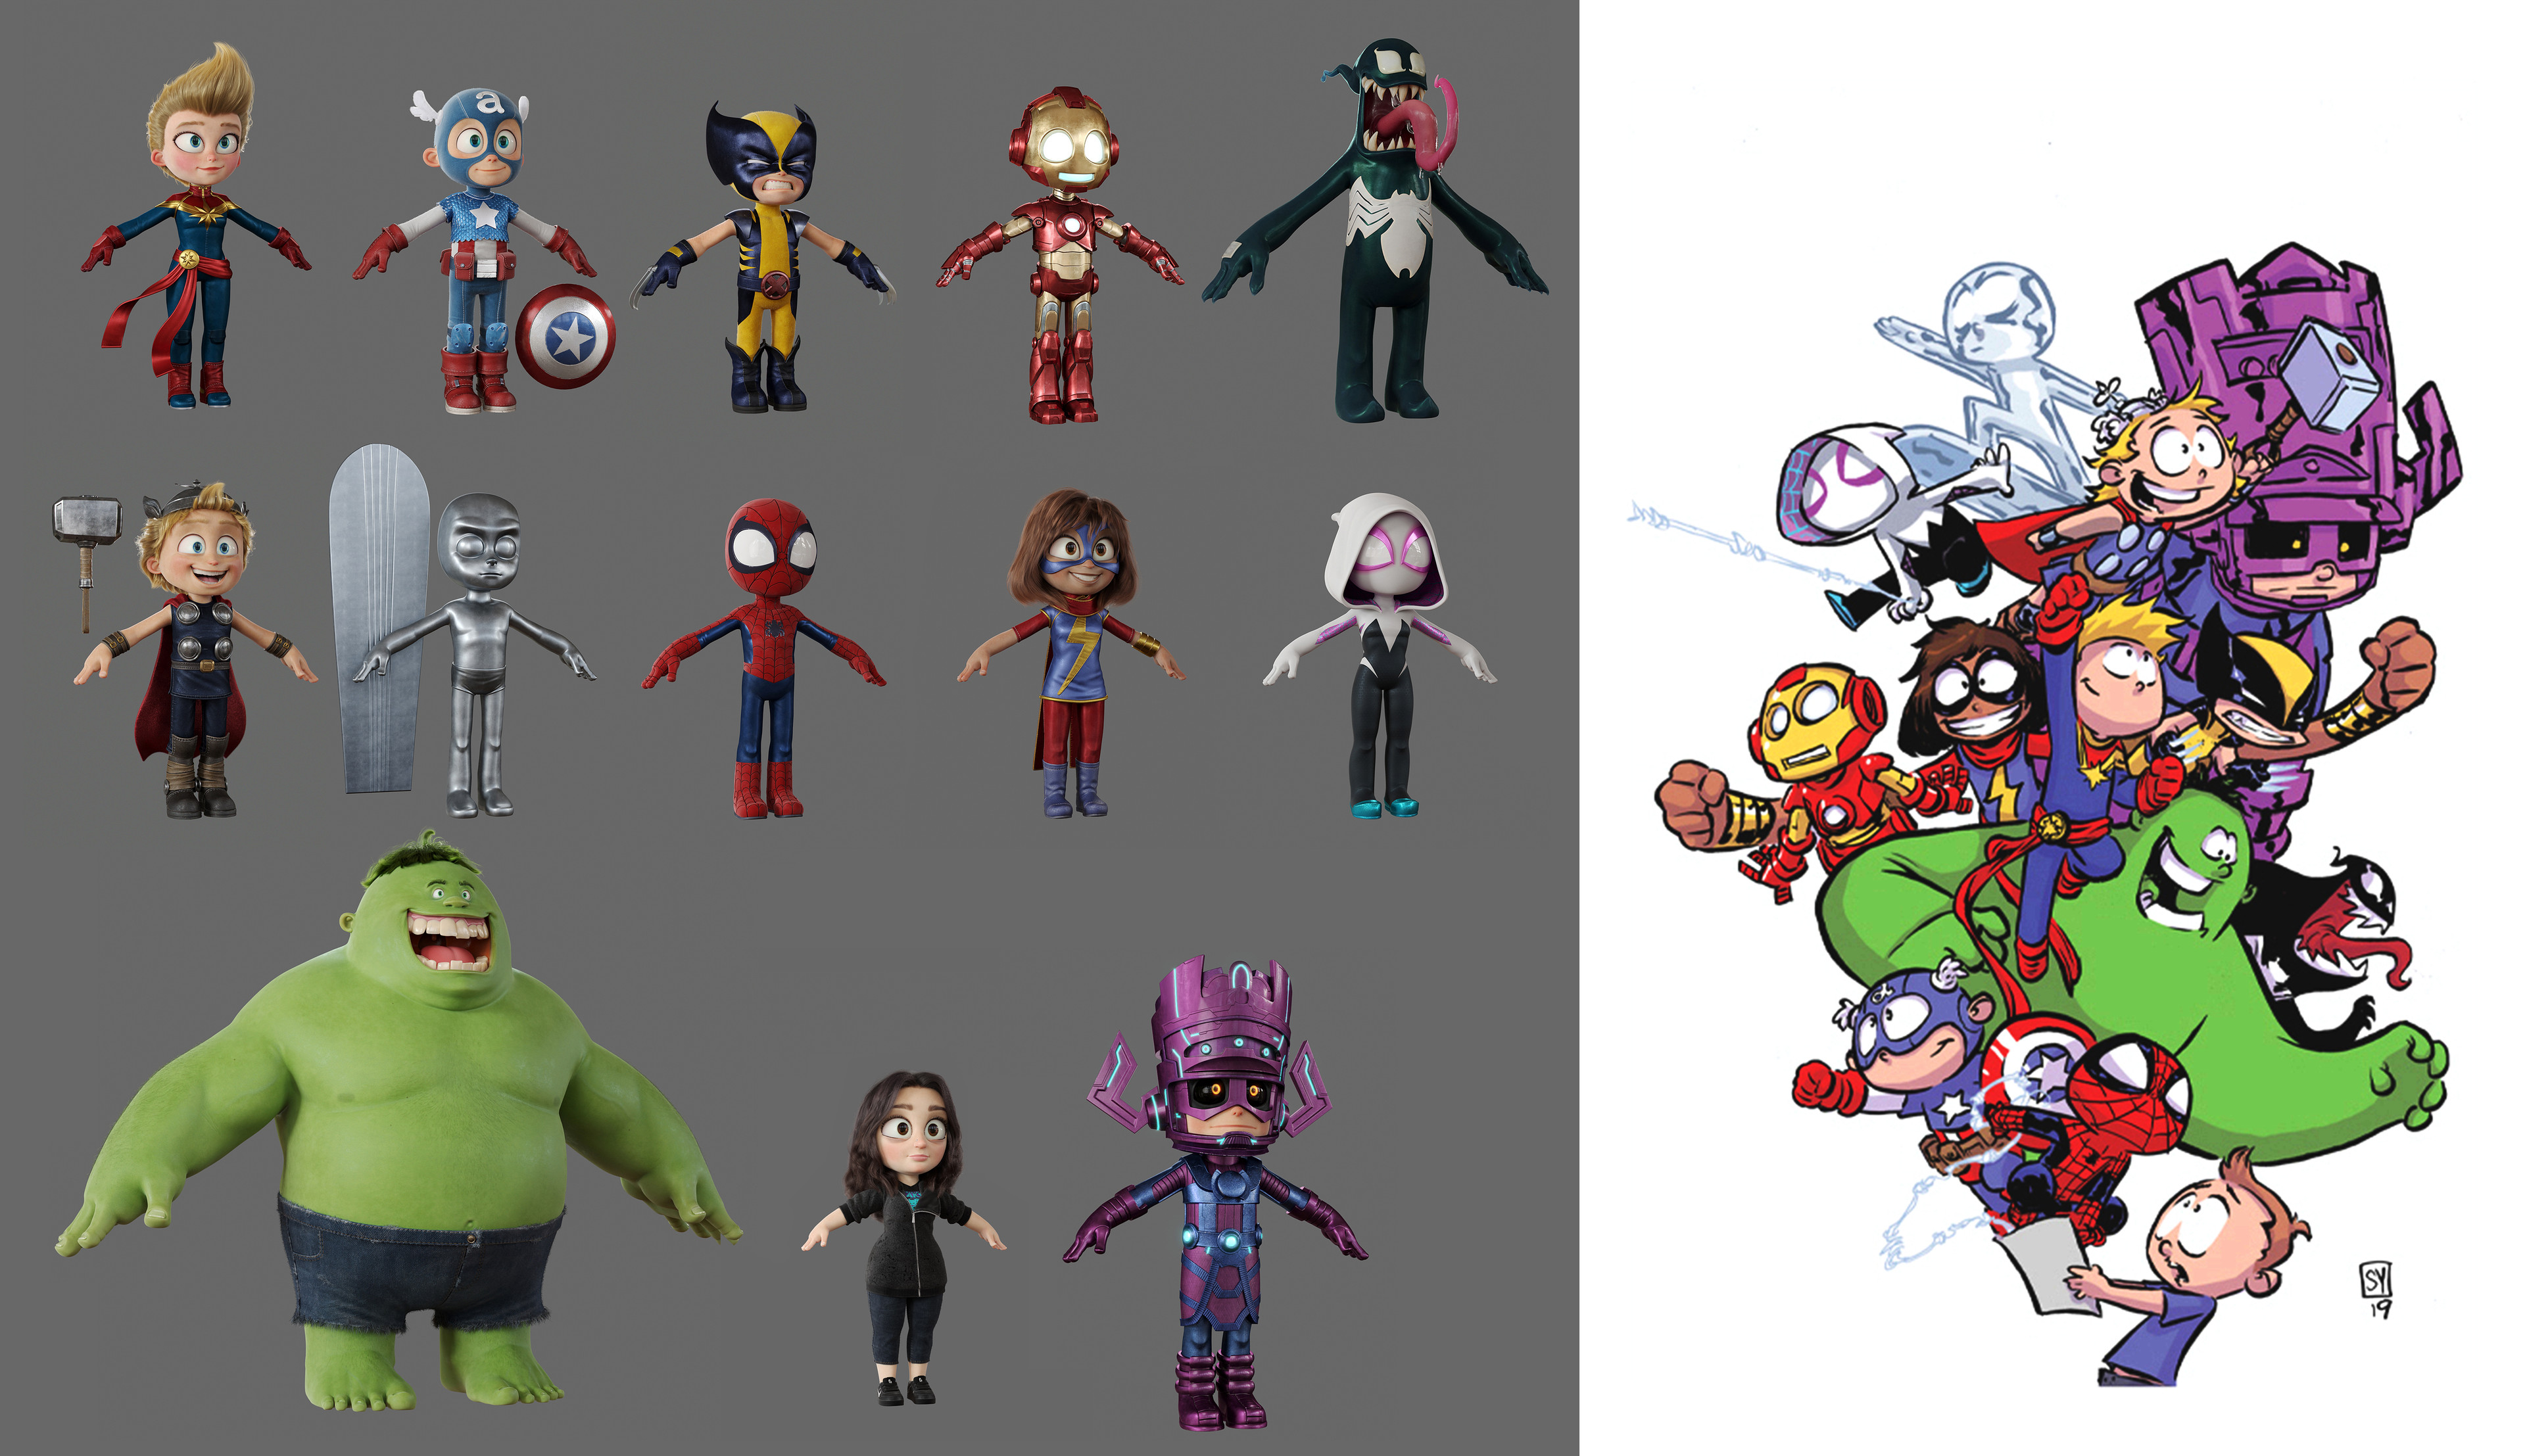 Lineup and original concept from the amazing Skottie Young